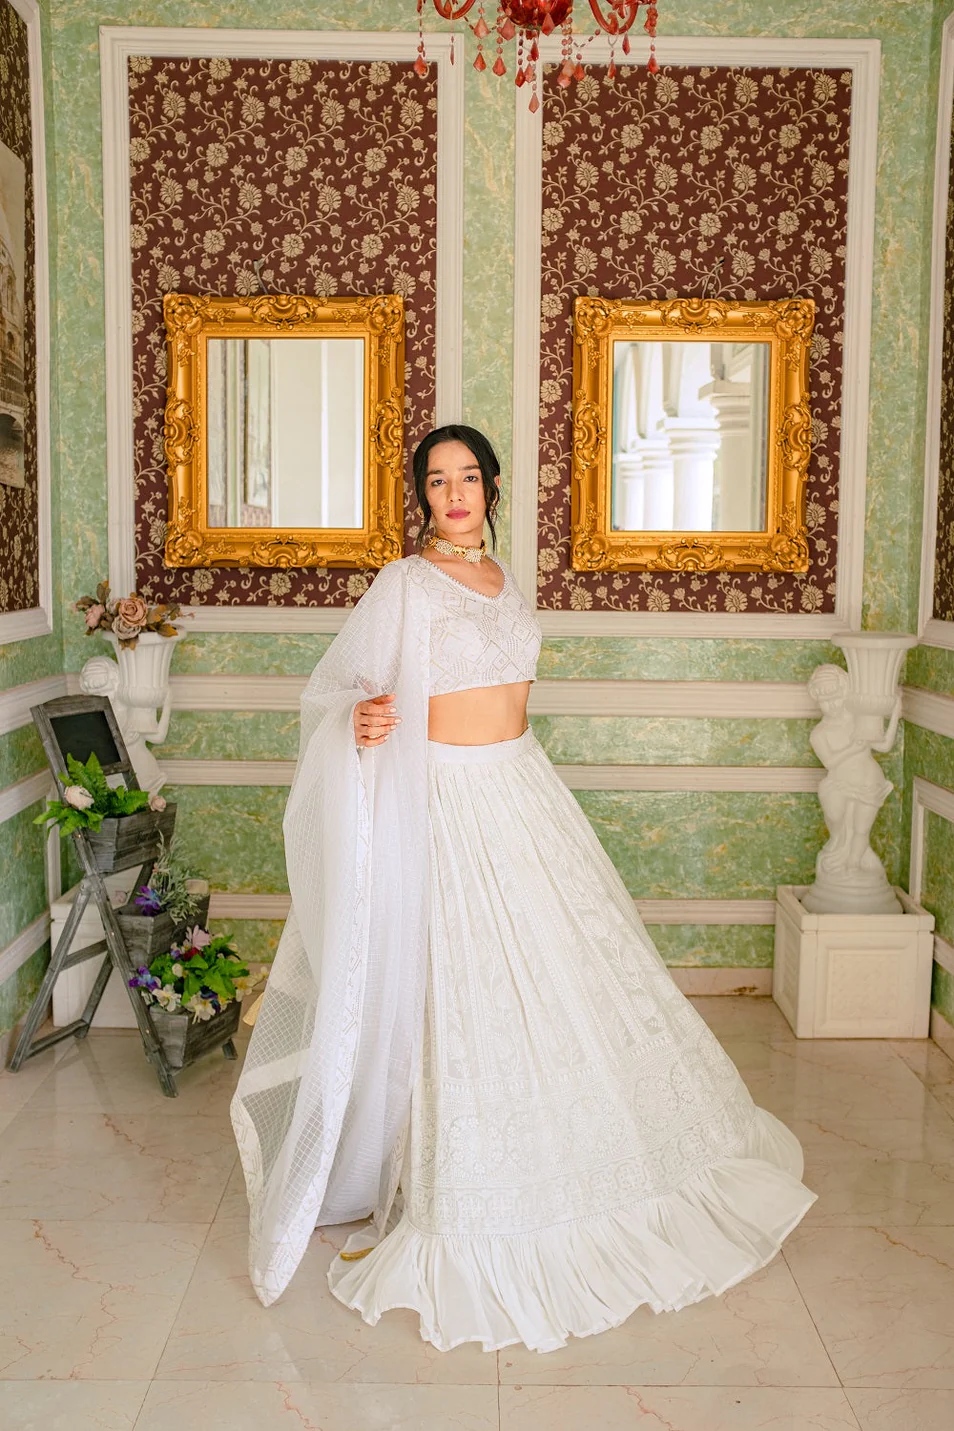 Underrated Brands: Festive Lehengas Under INR 25,000 For New Brides